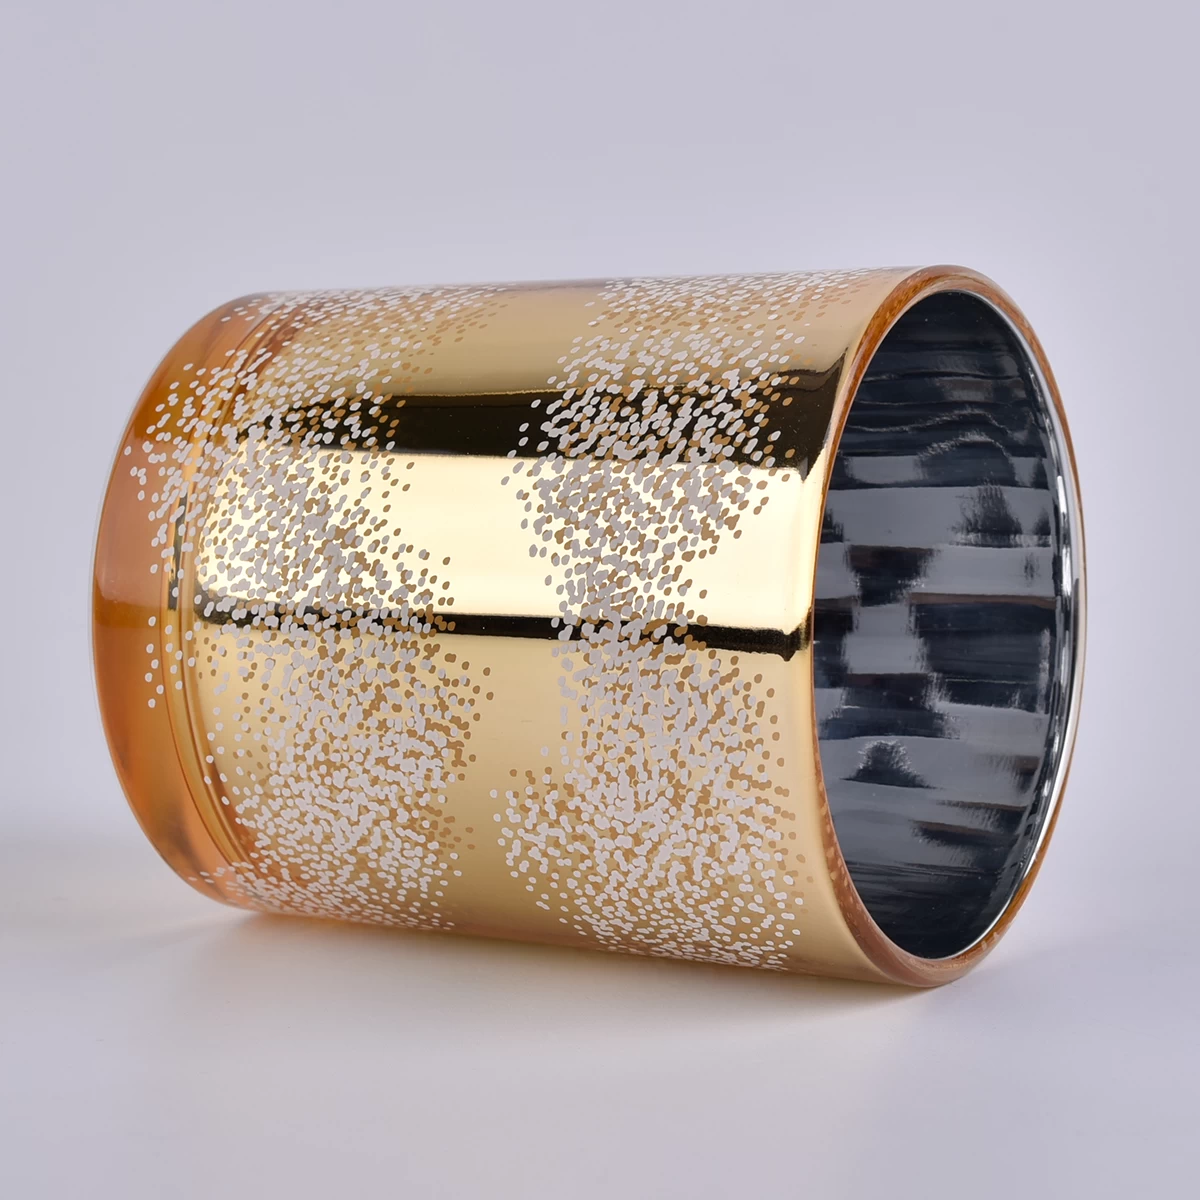 Cylinder gold glass candle jar with white dots prints